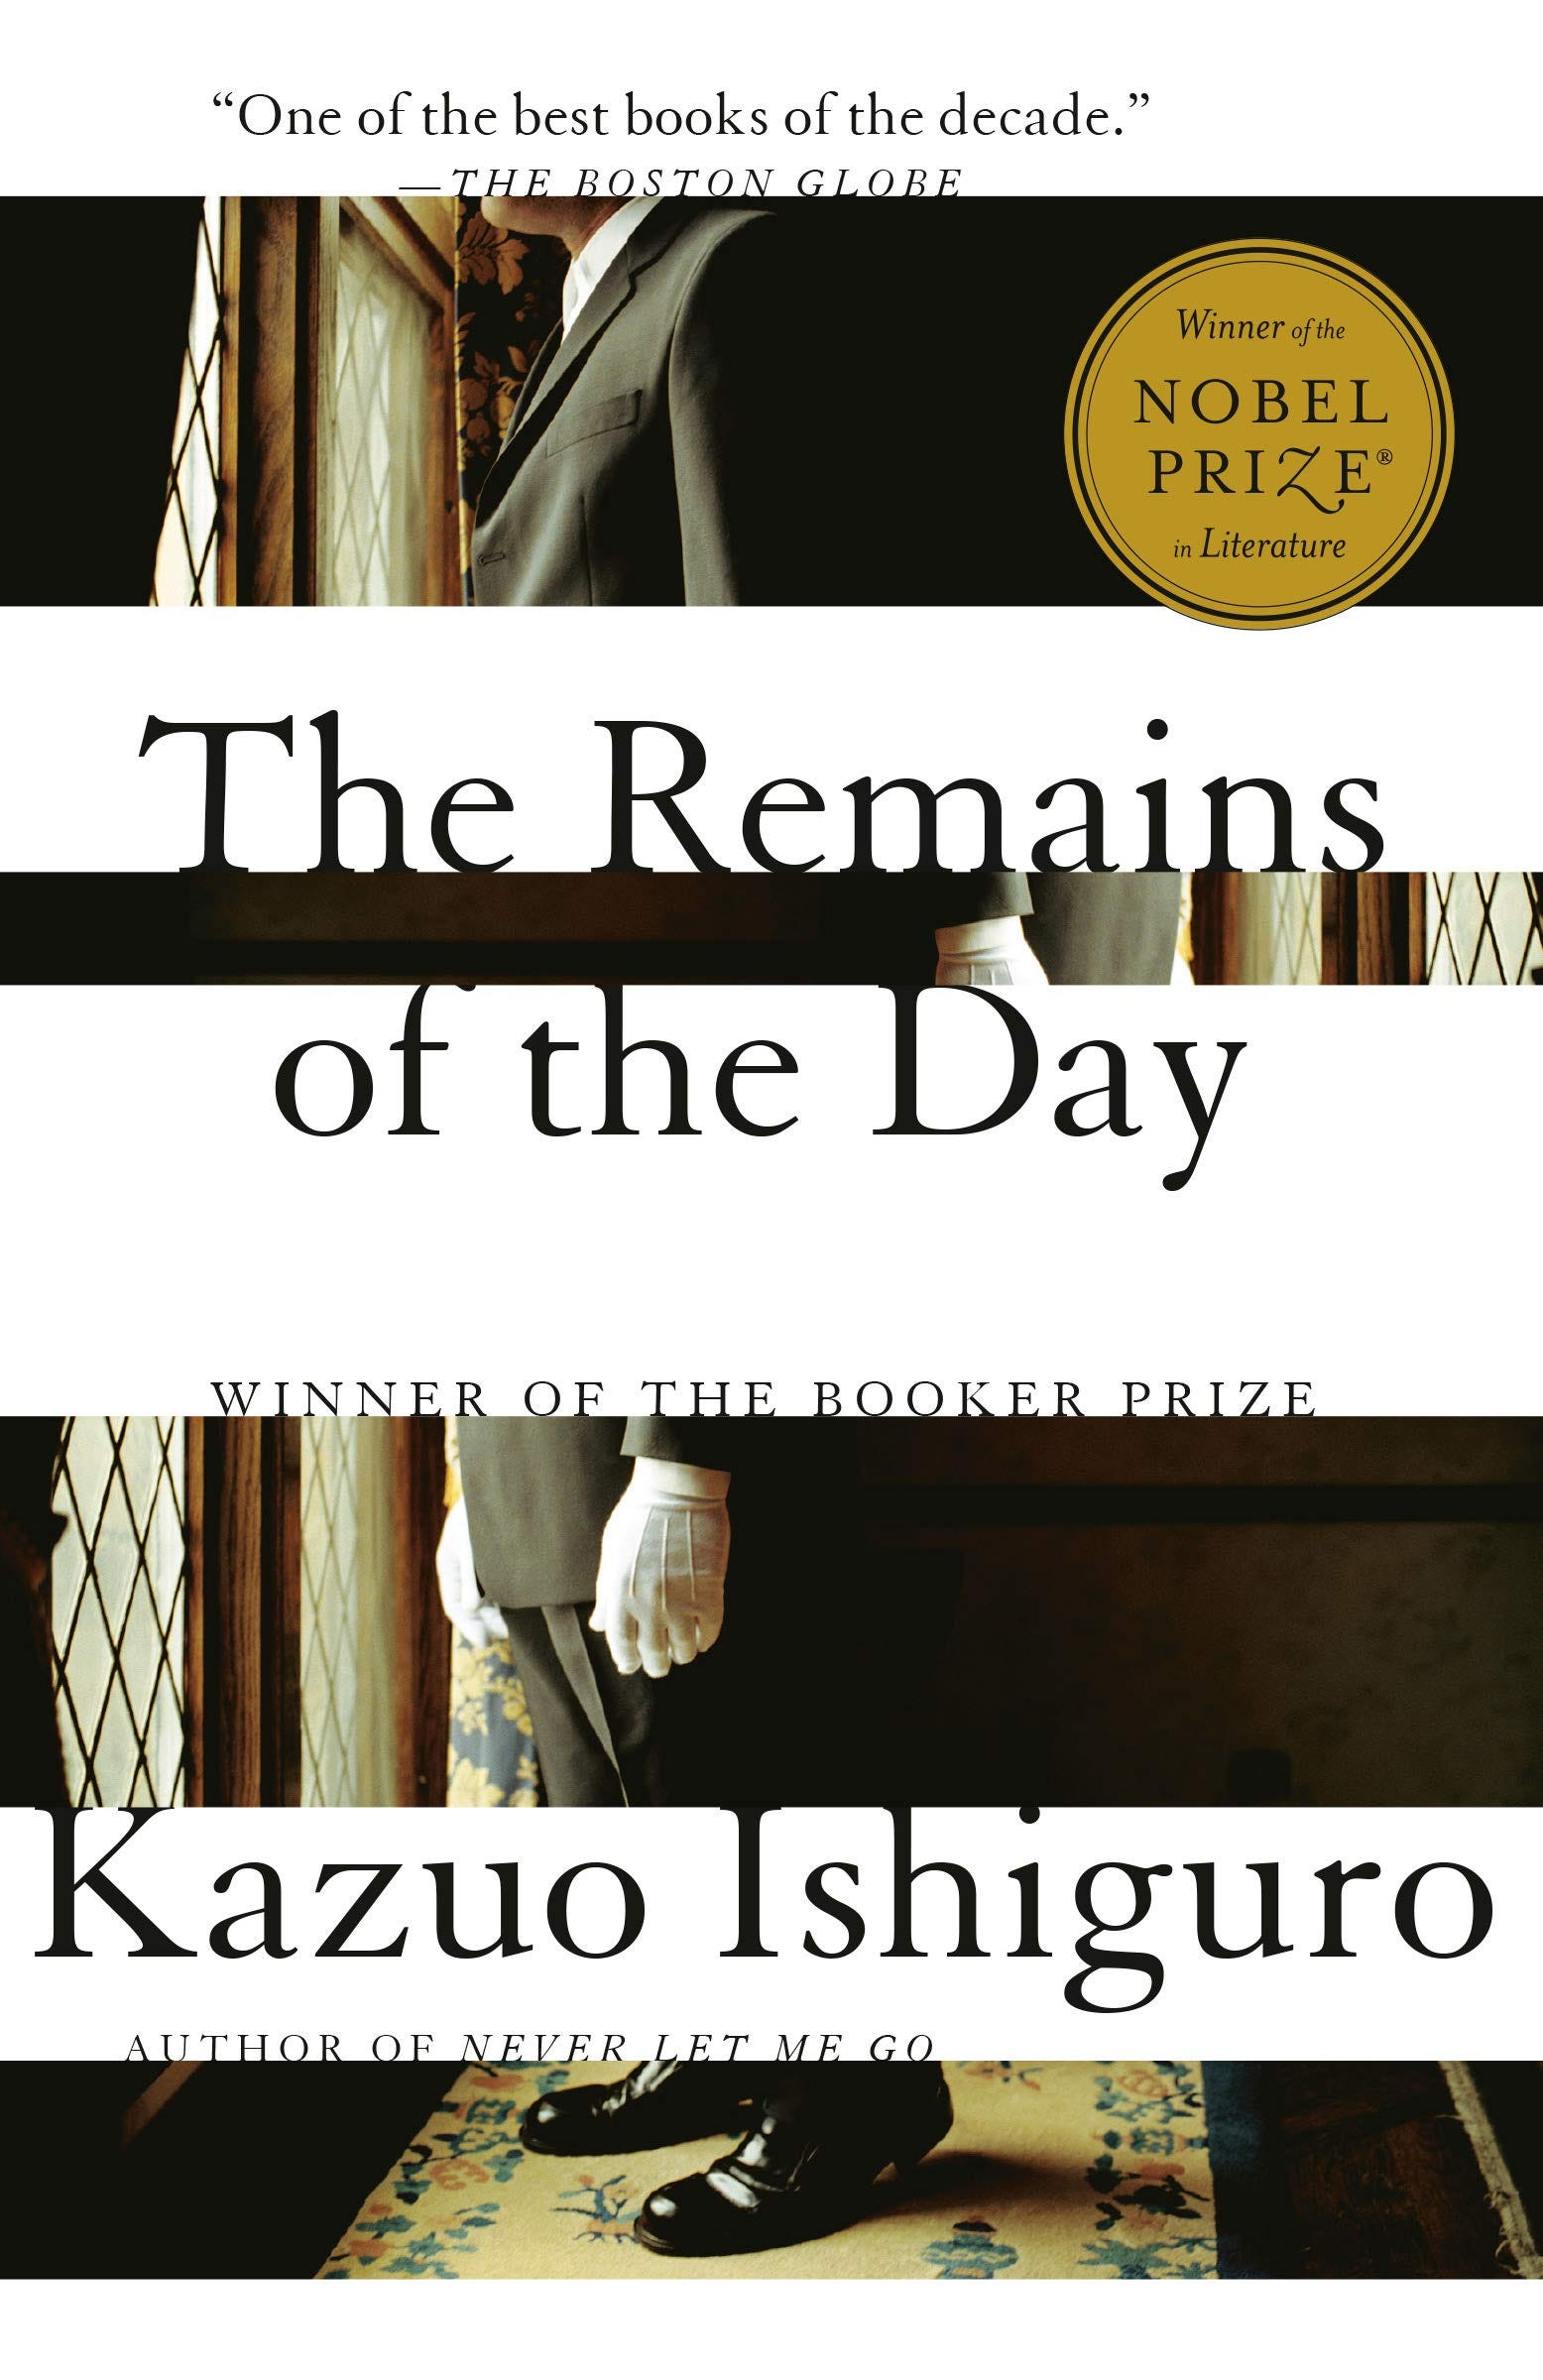 <p>This Kazuo Ishiguro novel tells of an English butler in wartime England who begins to question his lifelong loyalty to his employer while on a vacation.</p><p>Bezos has <a href="http://www.success.com/article/from-the-archives-jeff-bezos">said</a> of the book, "Before reading it, I didn't think a perfect novel was possible."</p>